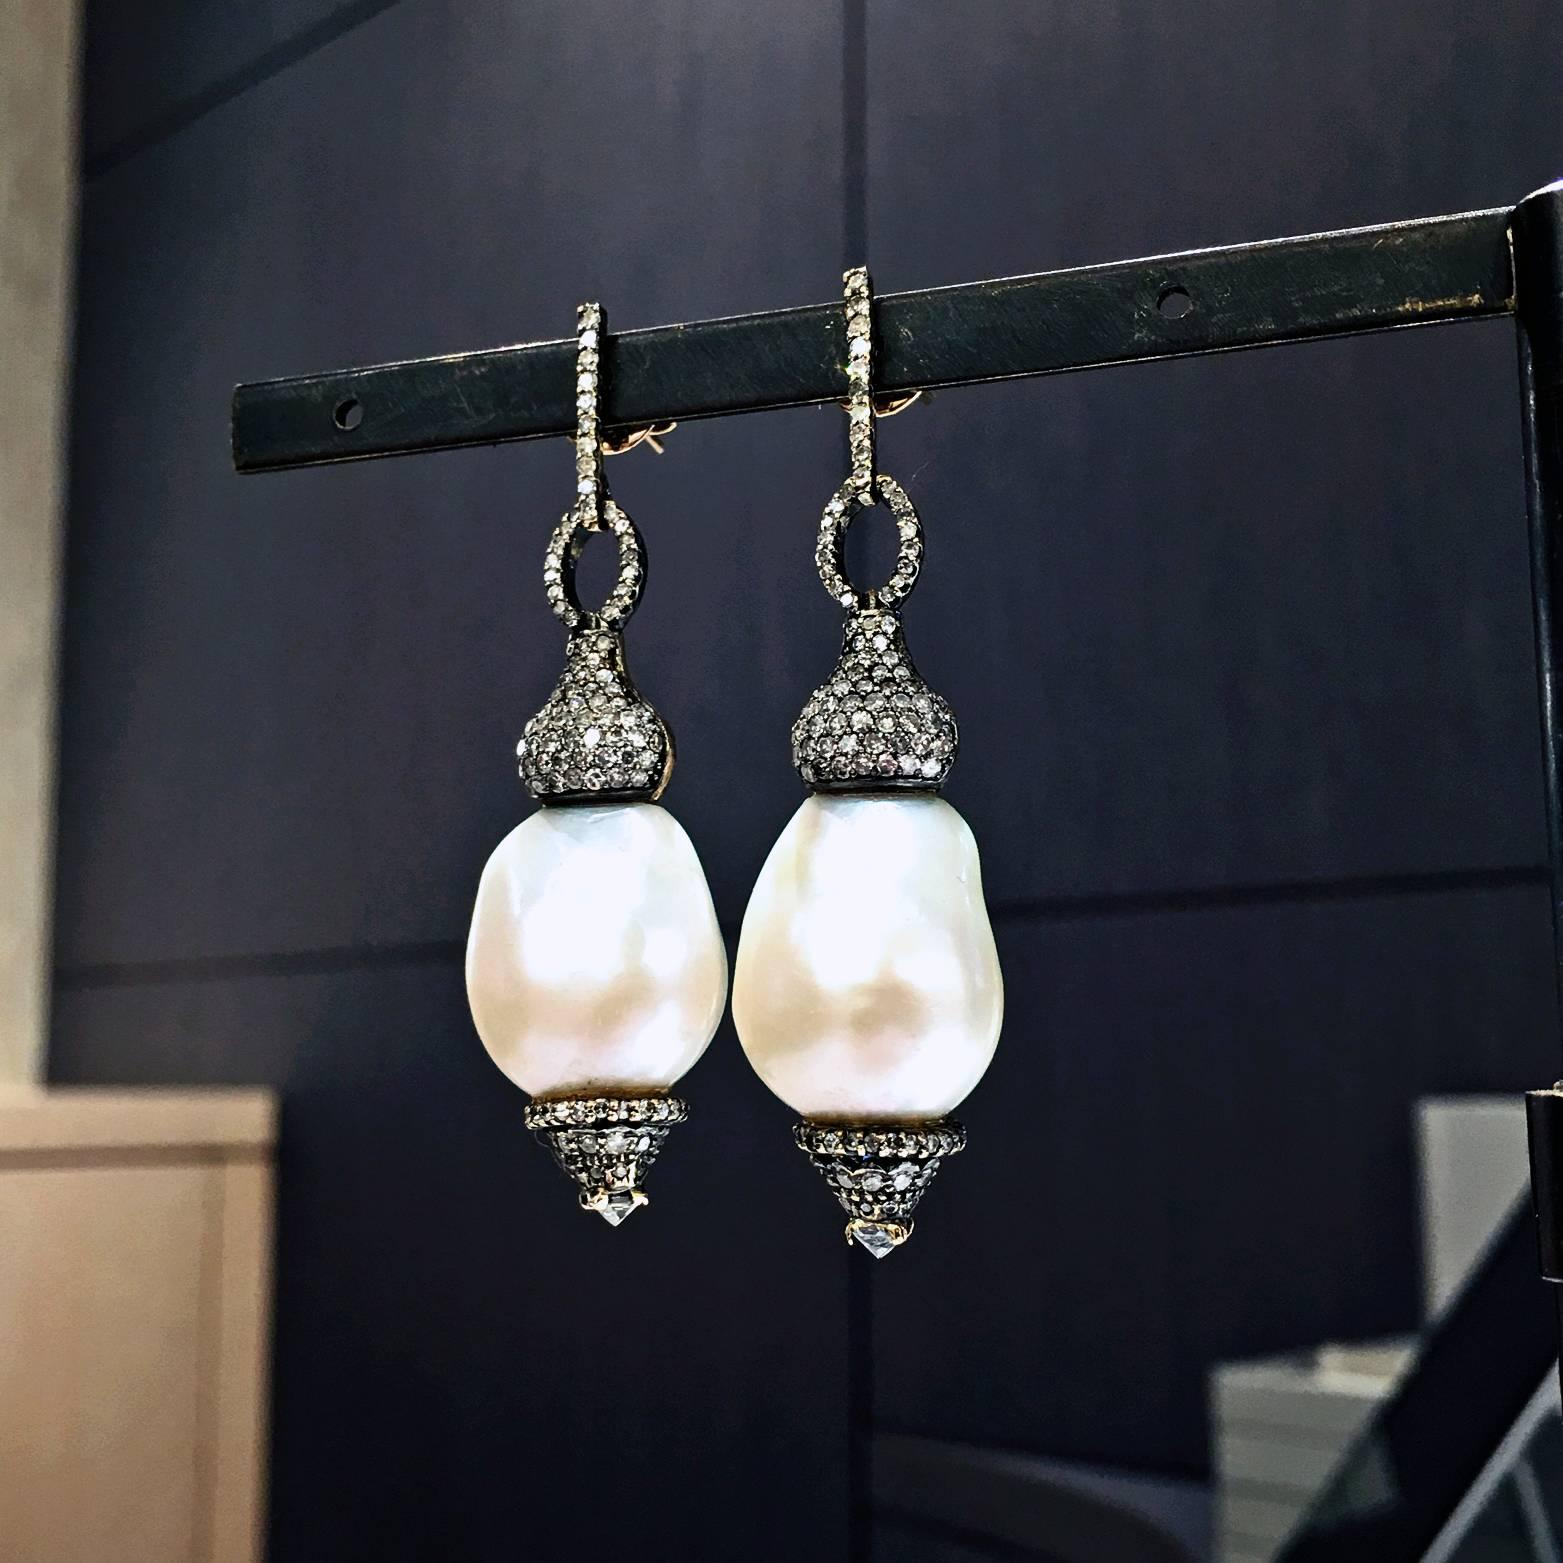 One-of-a-Kind Hollywood Drop Earrings handcrafted in 14k blackened white gold, 14k yellow gold, and sterling silver featuring two lustrous white baroque pearls and accented with 3.2 total carats of brilliant-cut diamonds.